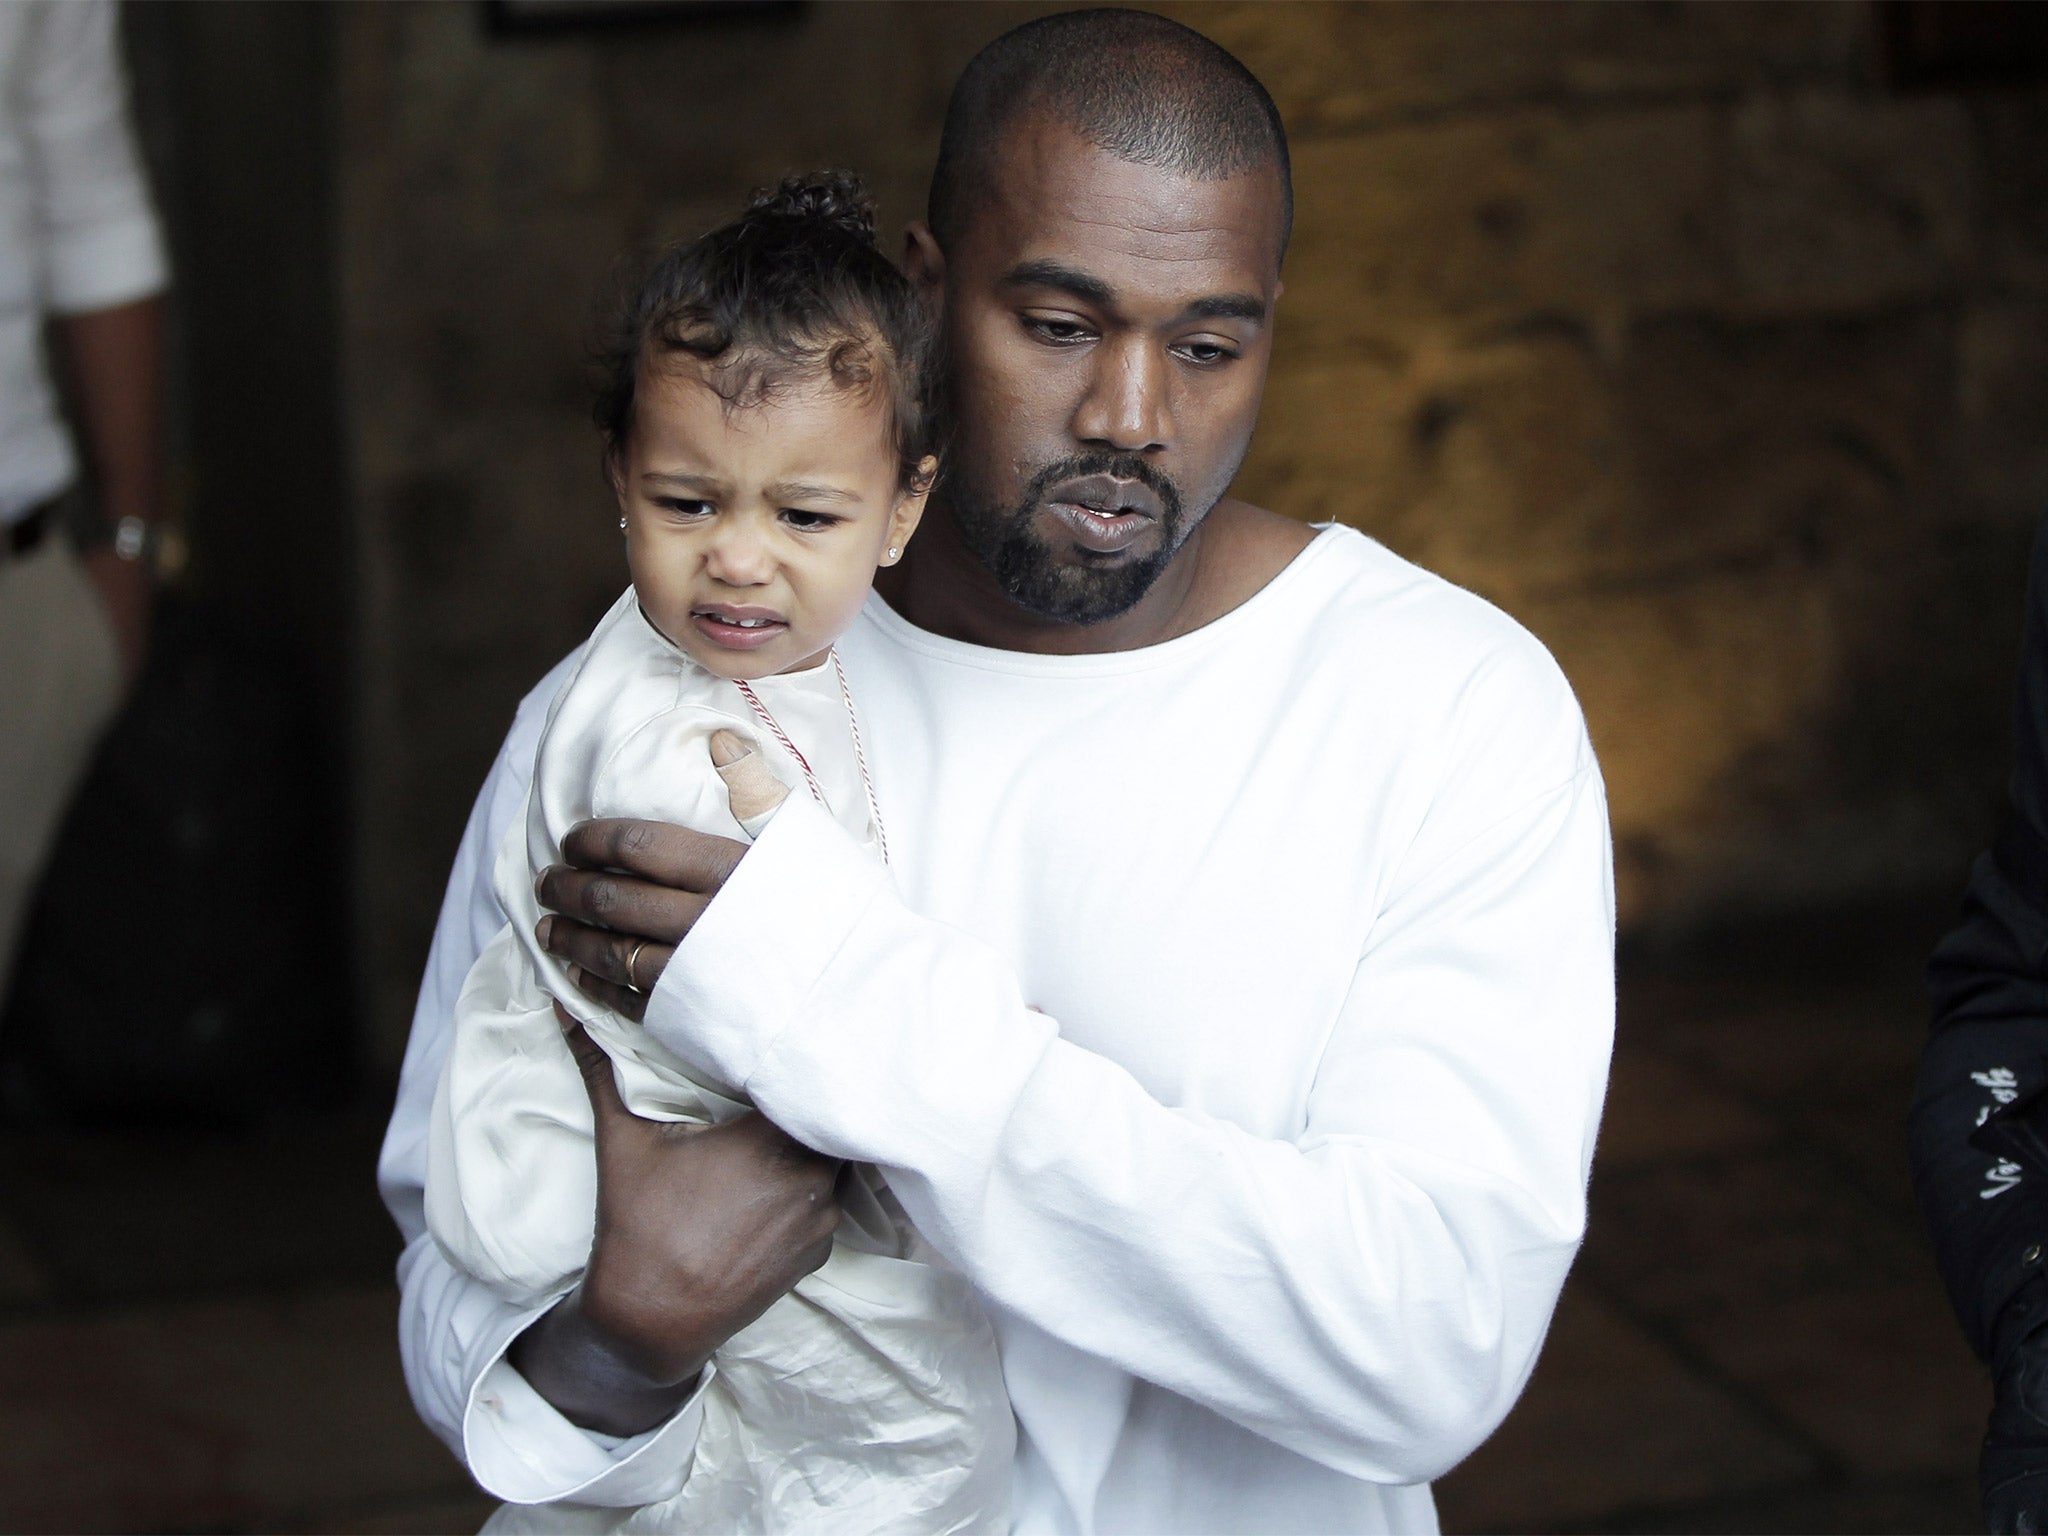 Rapper Kanye West carries daughter North following the baptism ceremony